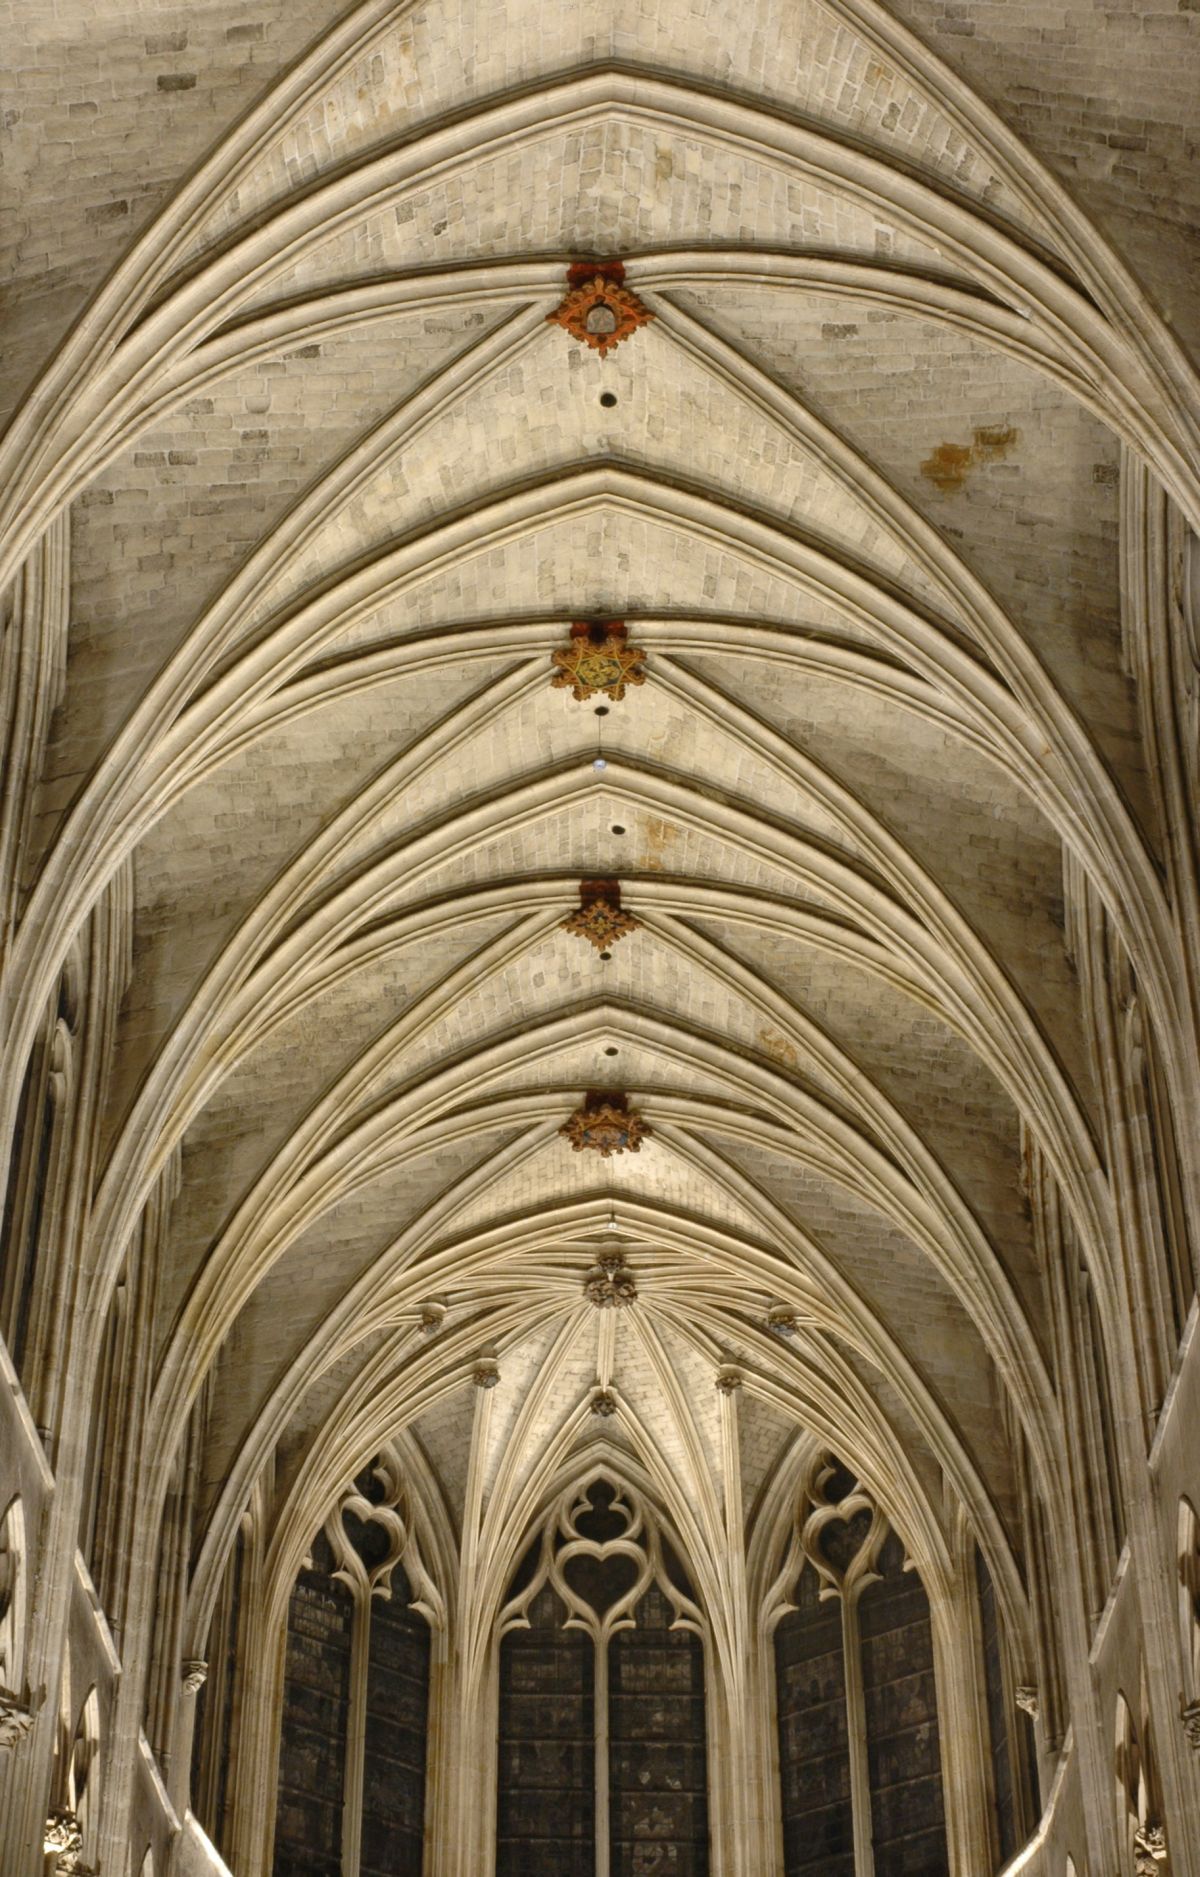 Vaulted ceilings comes from medieval times